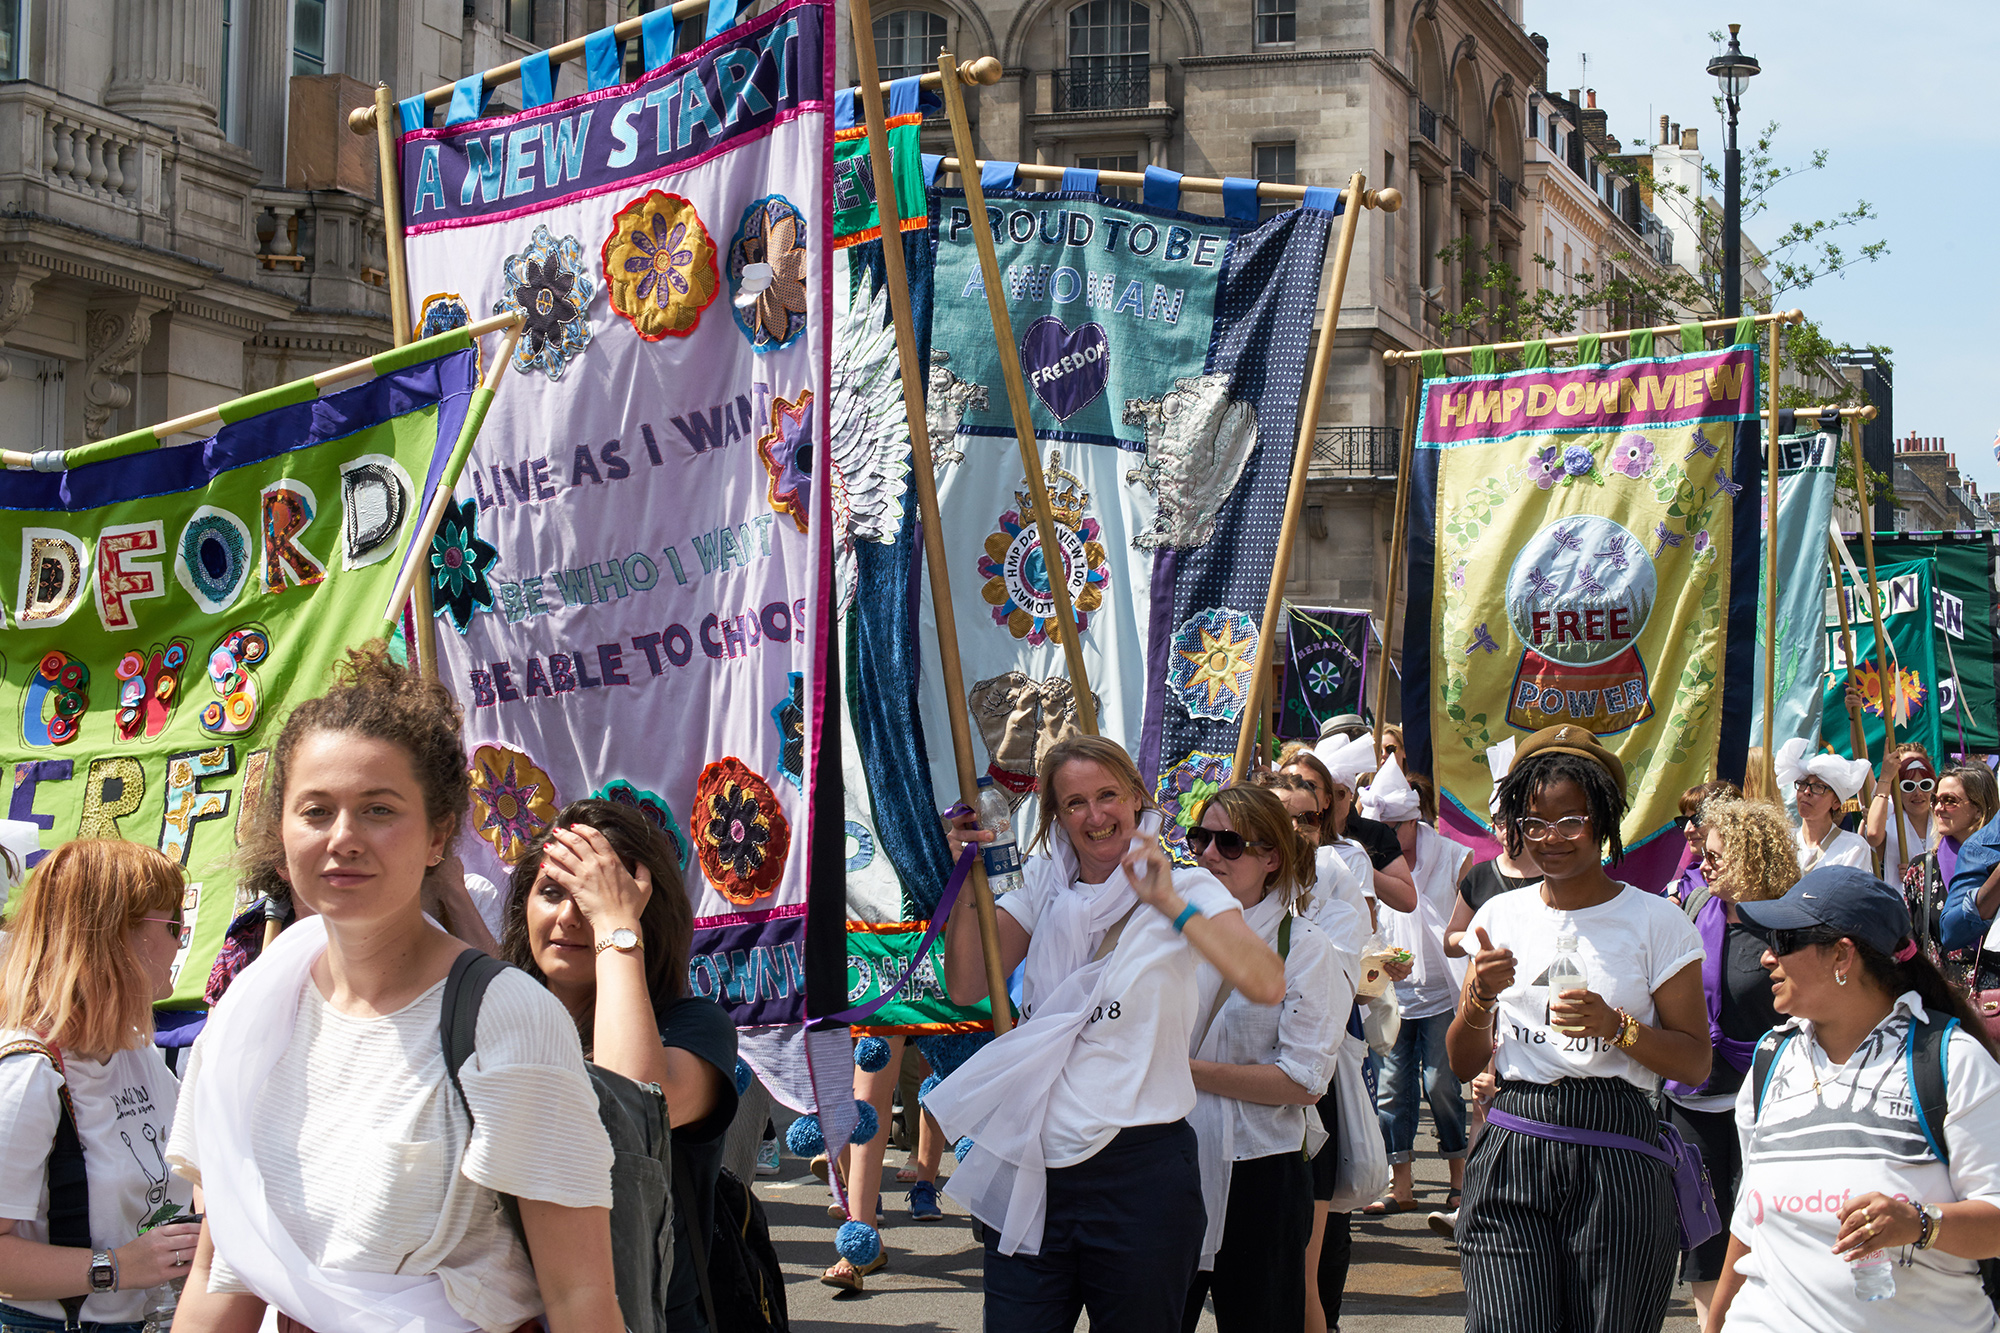 Procession of people carrying banners